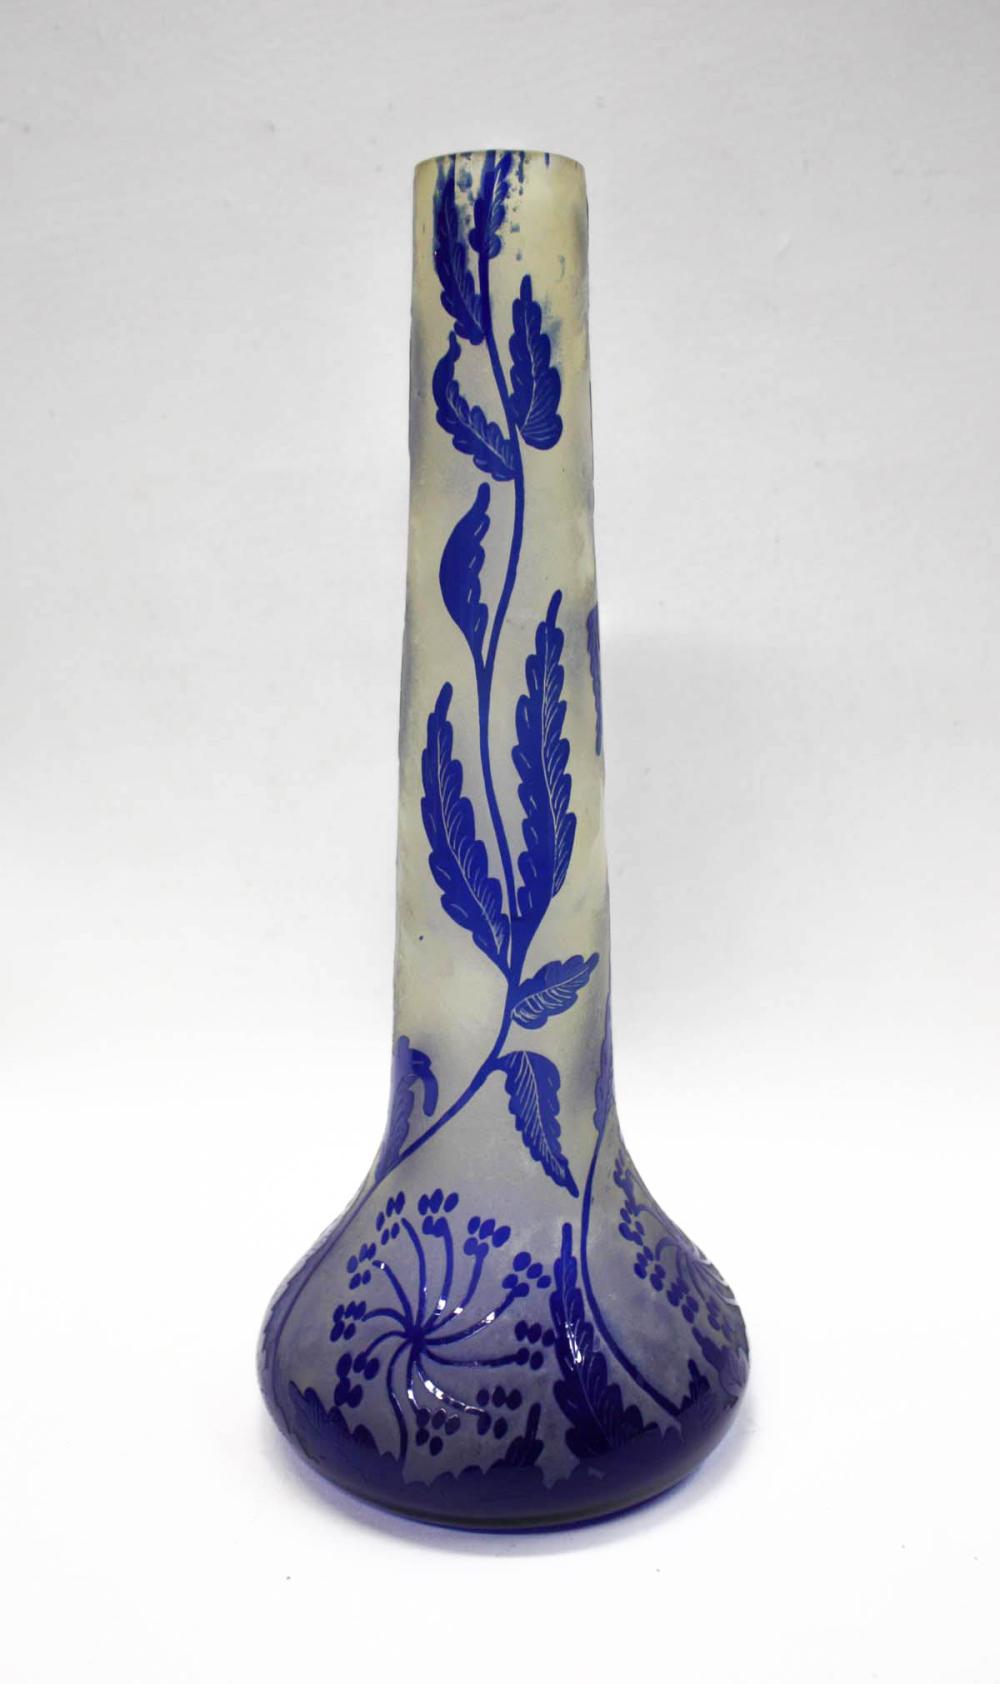 CAMEO GLASS VASE, OF BULBOUS FORM